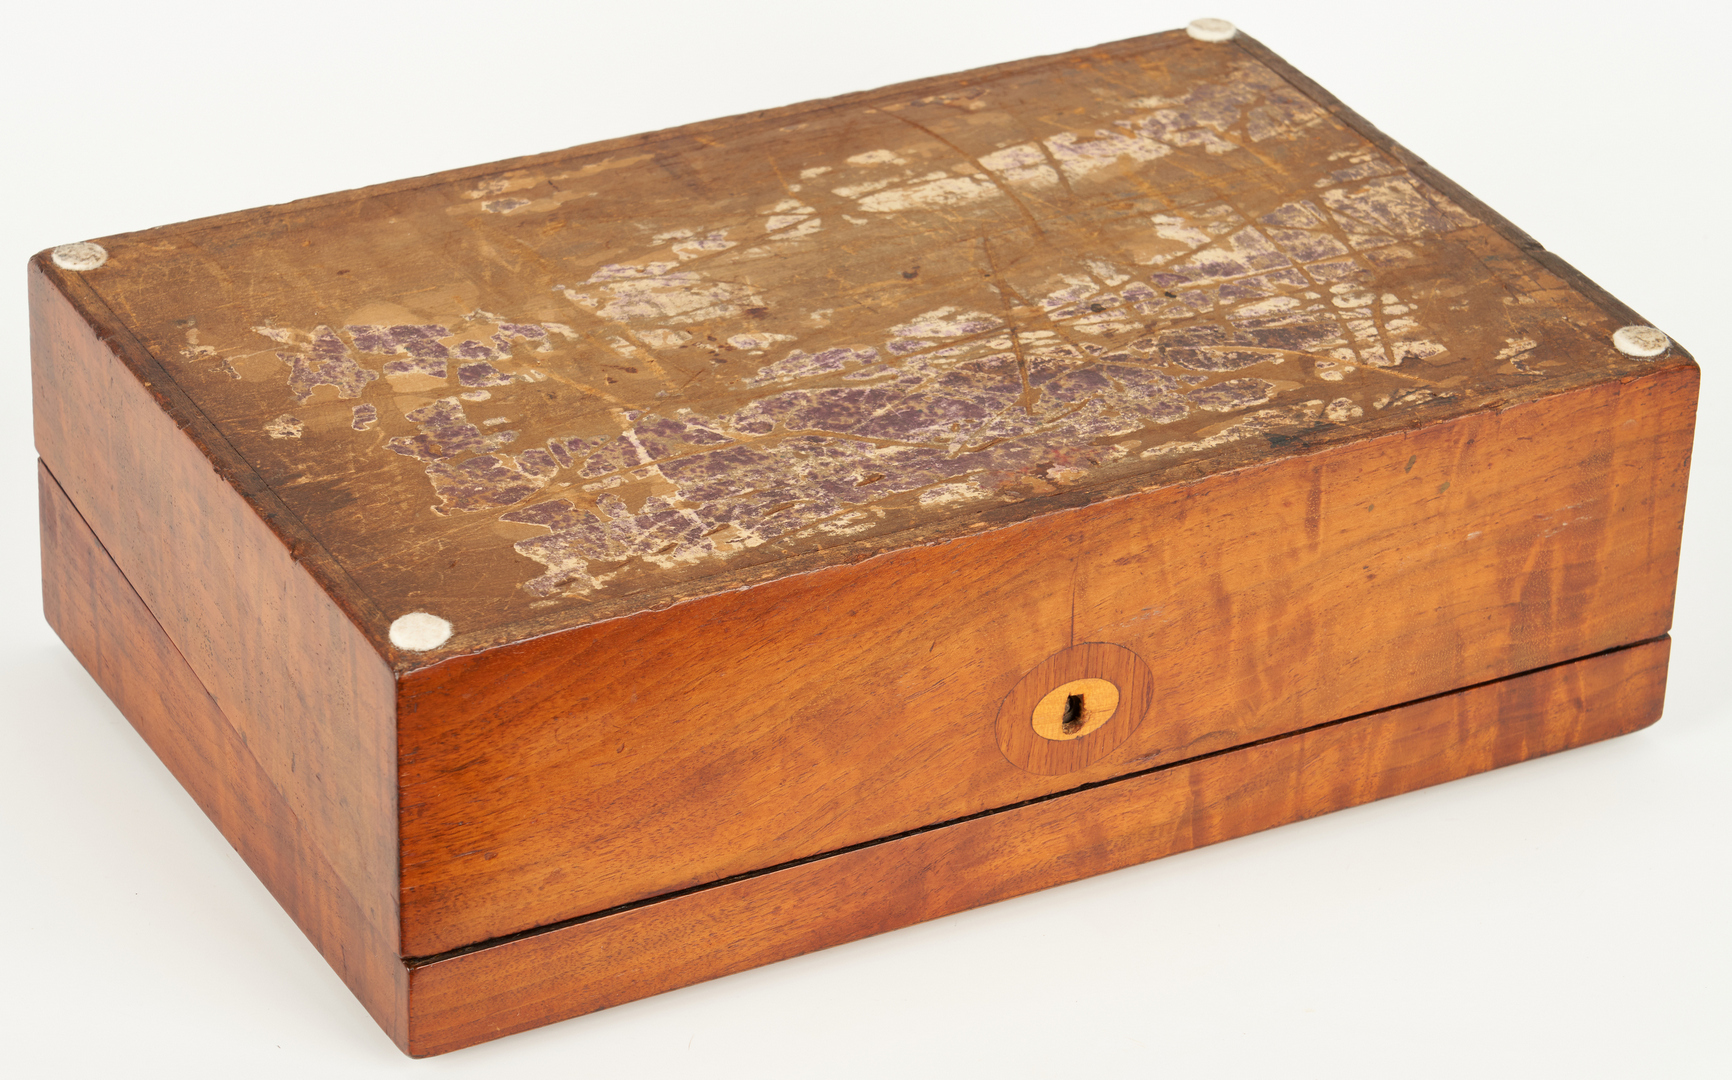 Lot 352: 3 Boxes with Inlaid Tops, incl. Lap Desk